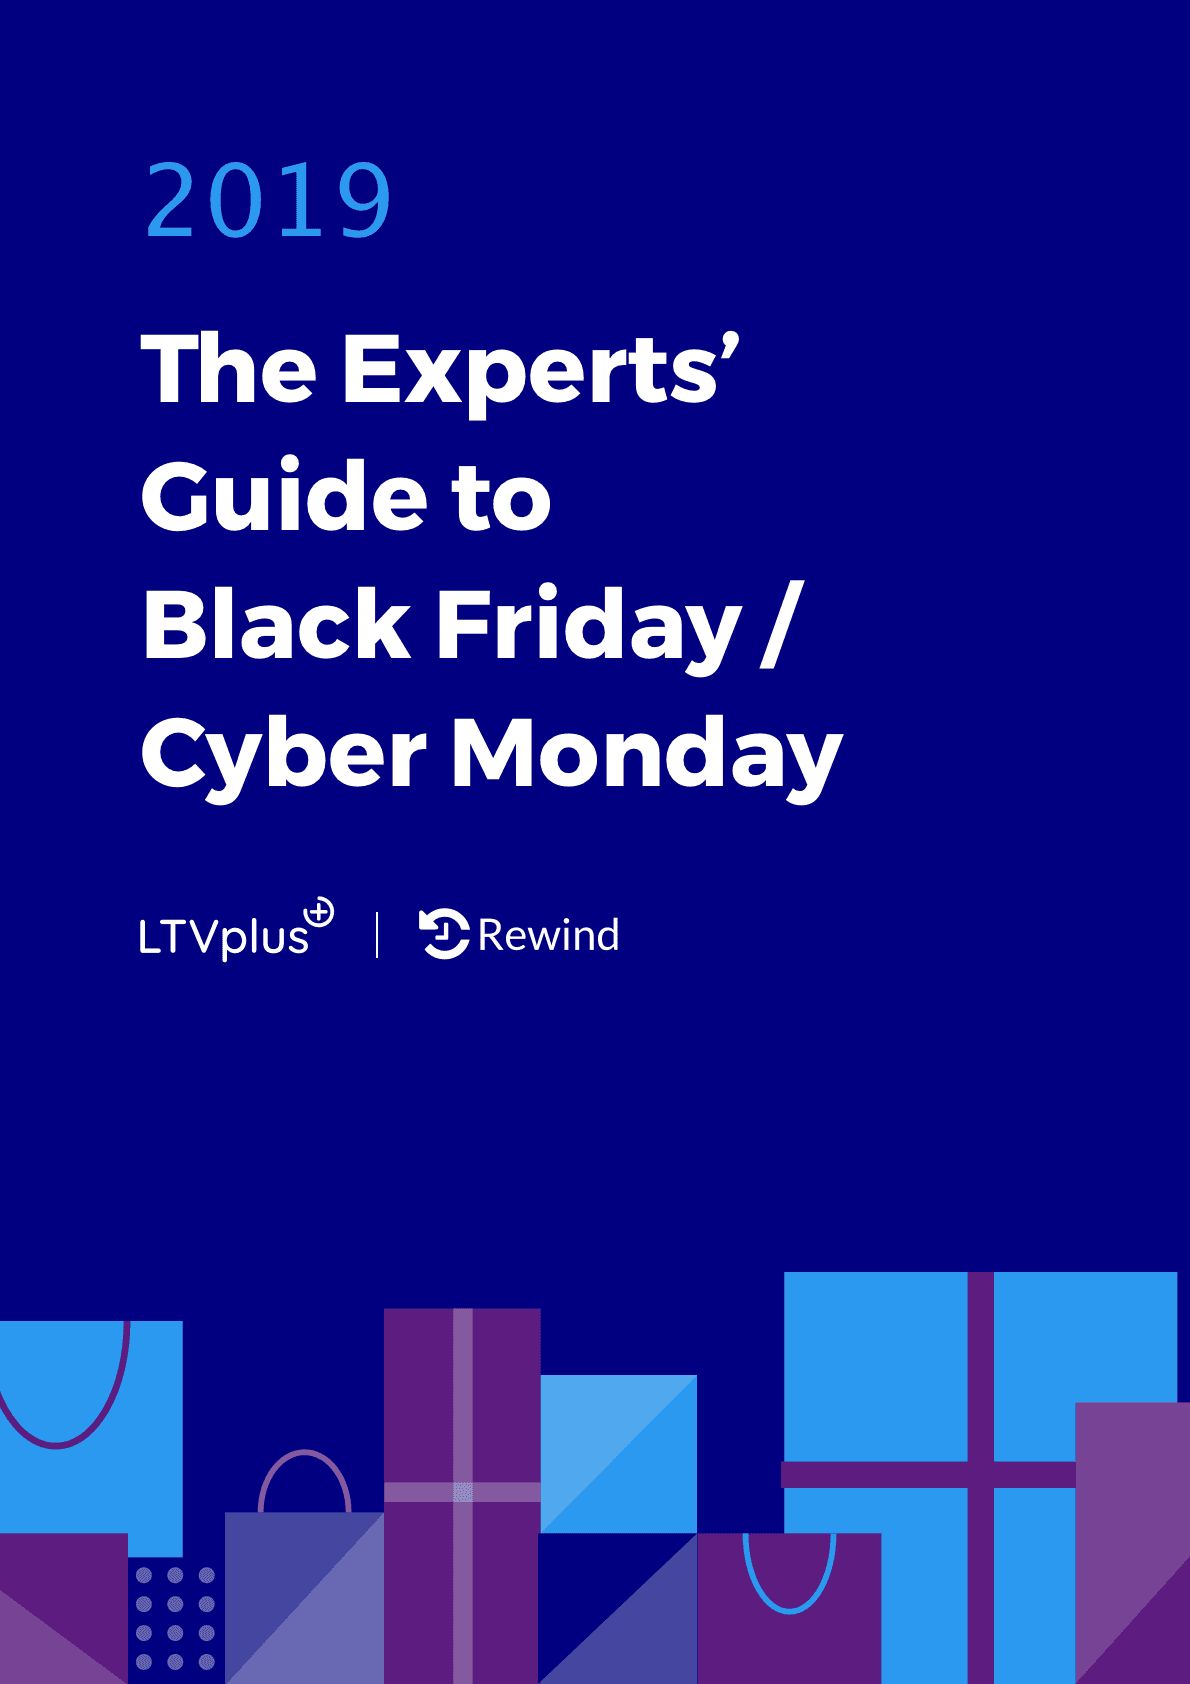 The Experts’ Guide to Black Friday /Cyber Monday